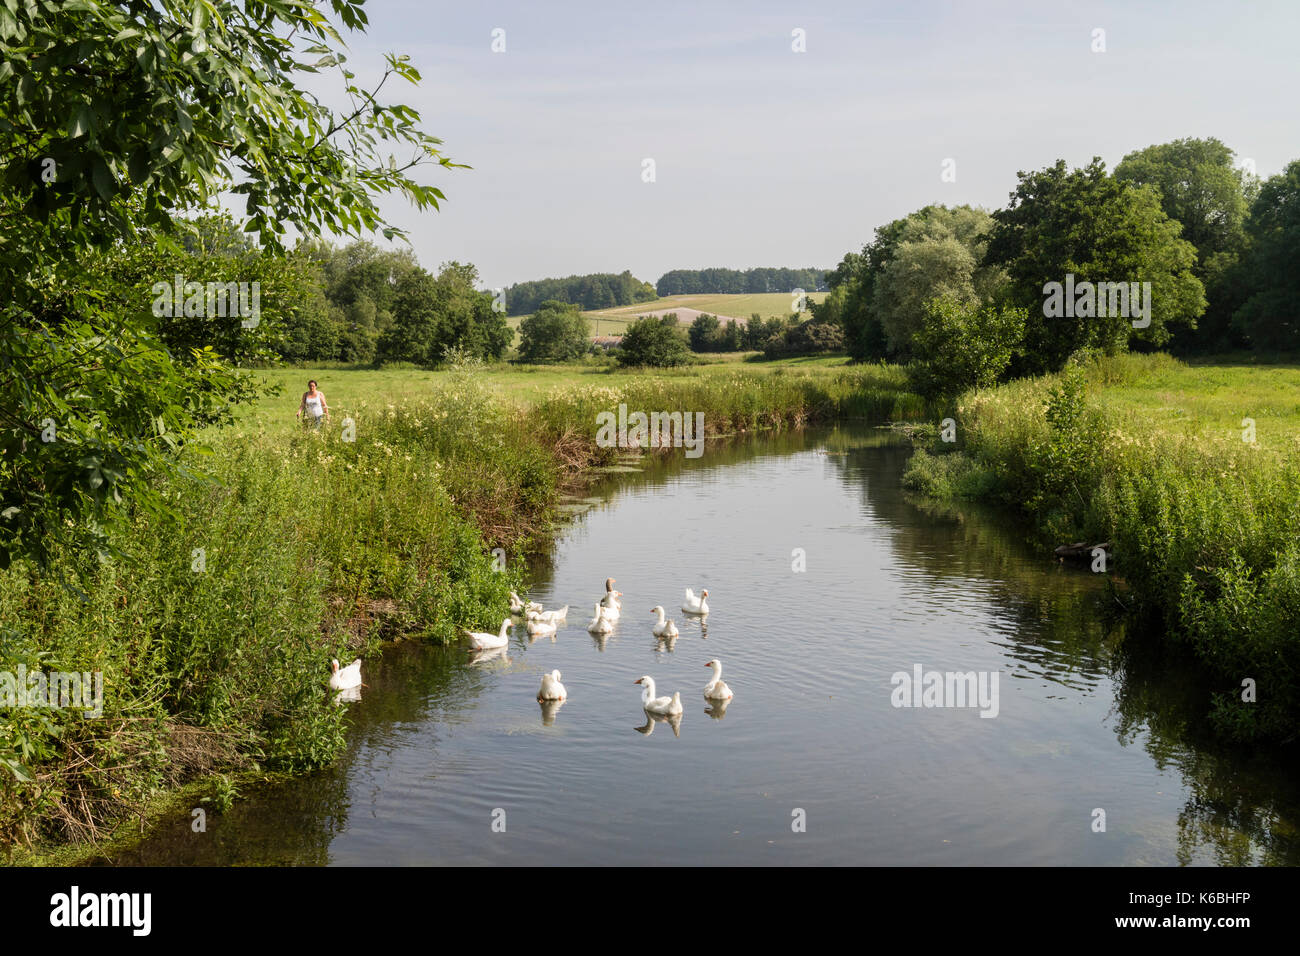 Countryside and view of rural River Avon at Upavon, Wiltshire, England Stock Photo